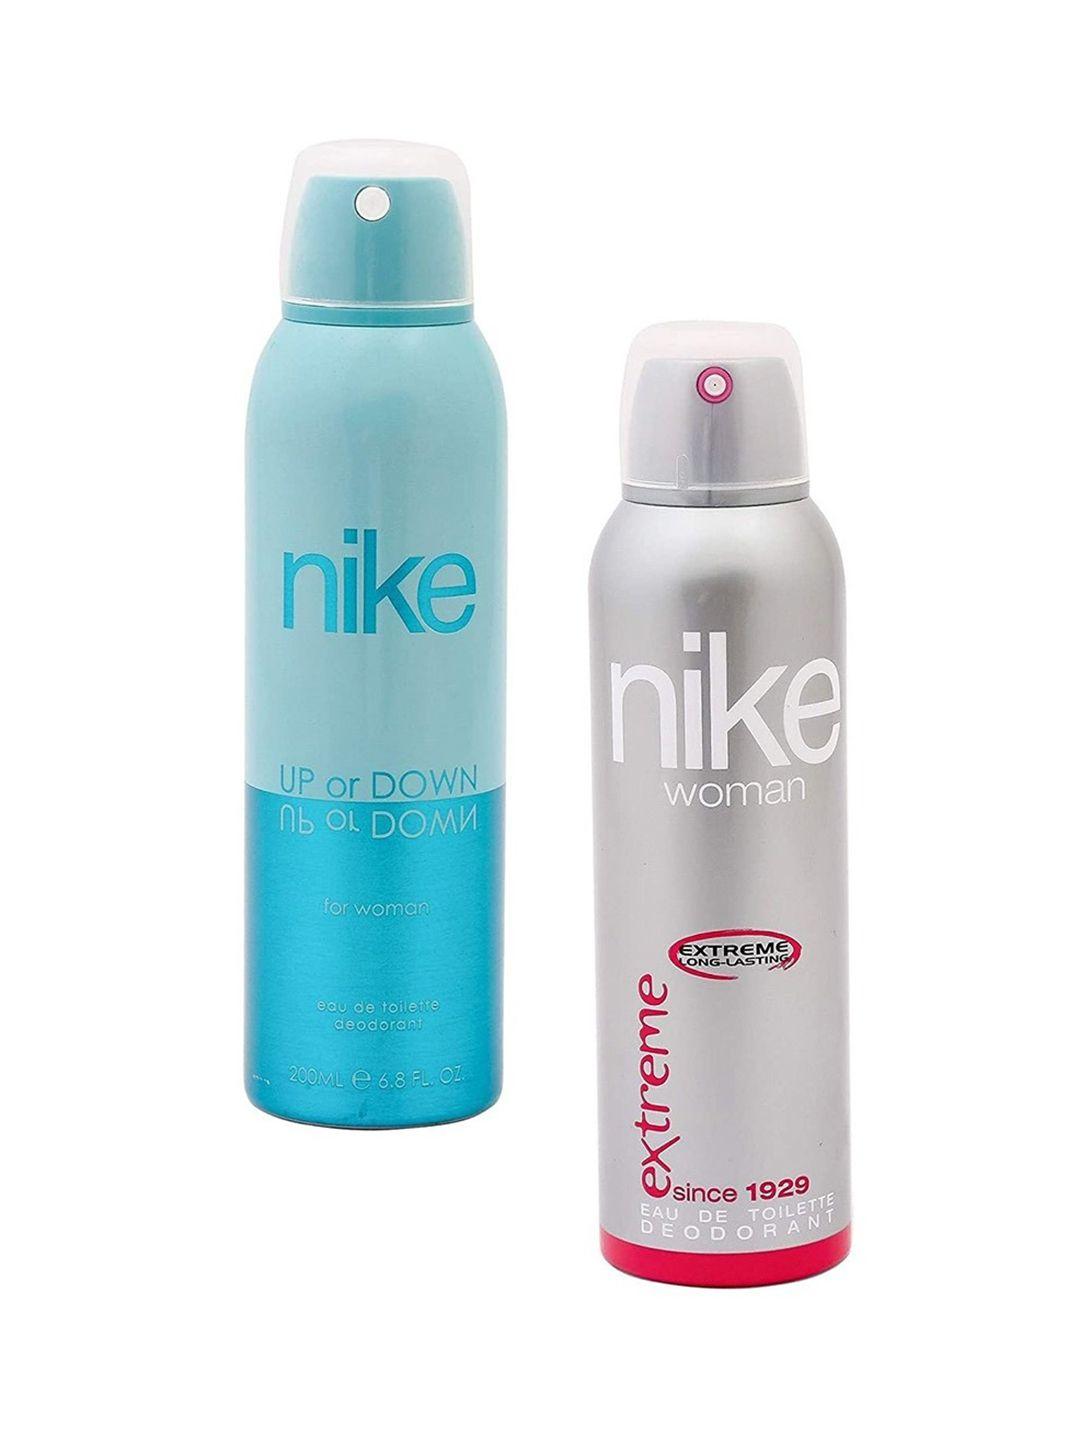 nike-pack-of-2-woman-up-or-down/extreme-deodorant---200-ml-each